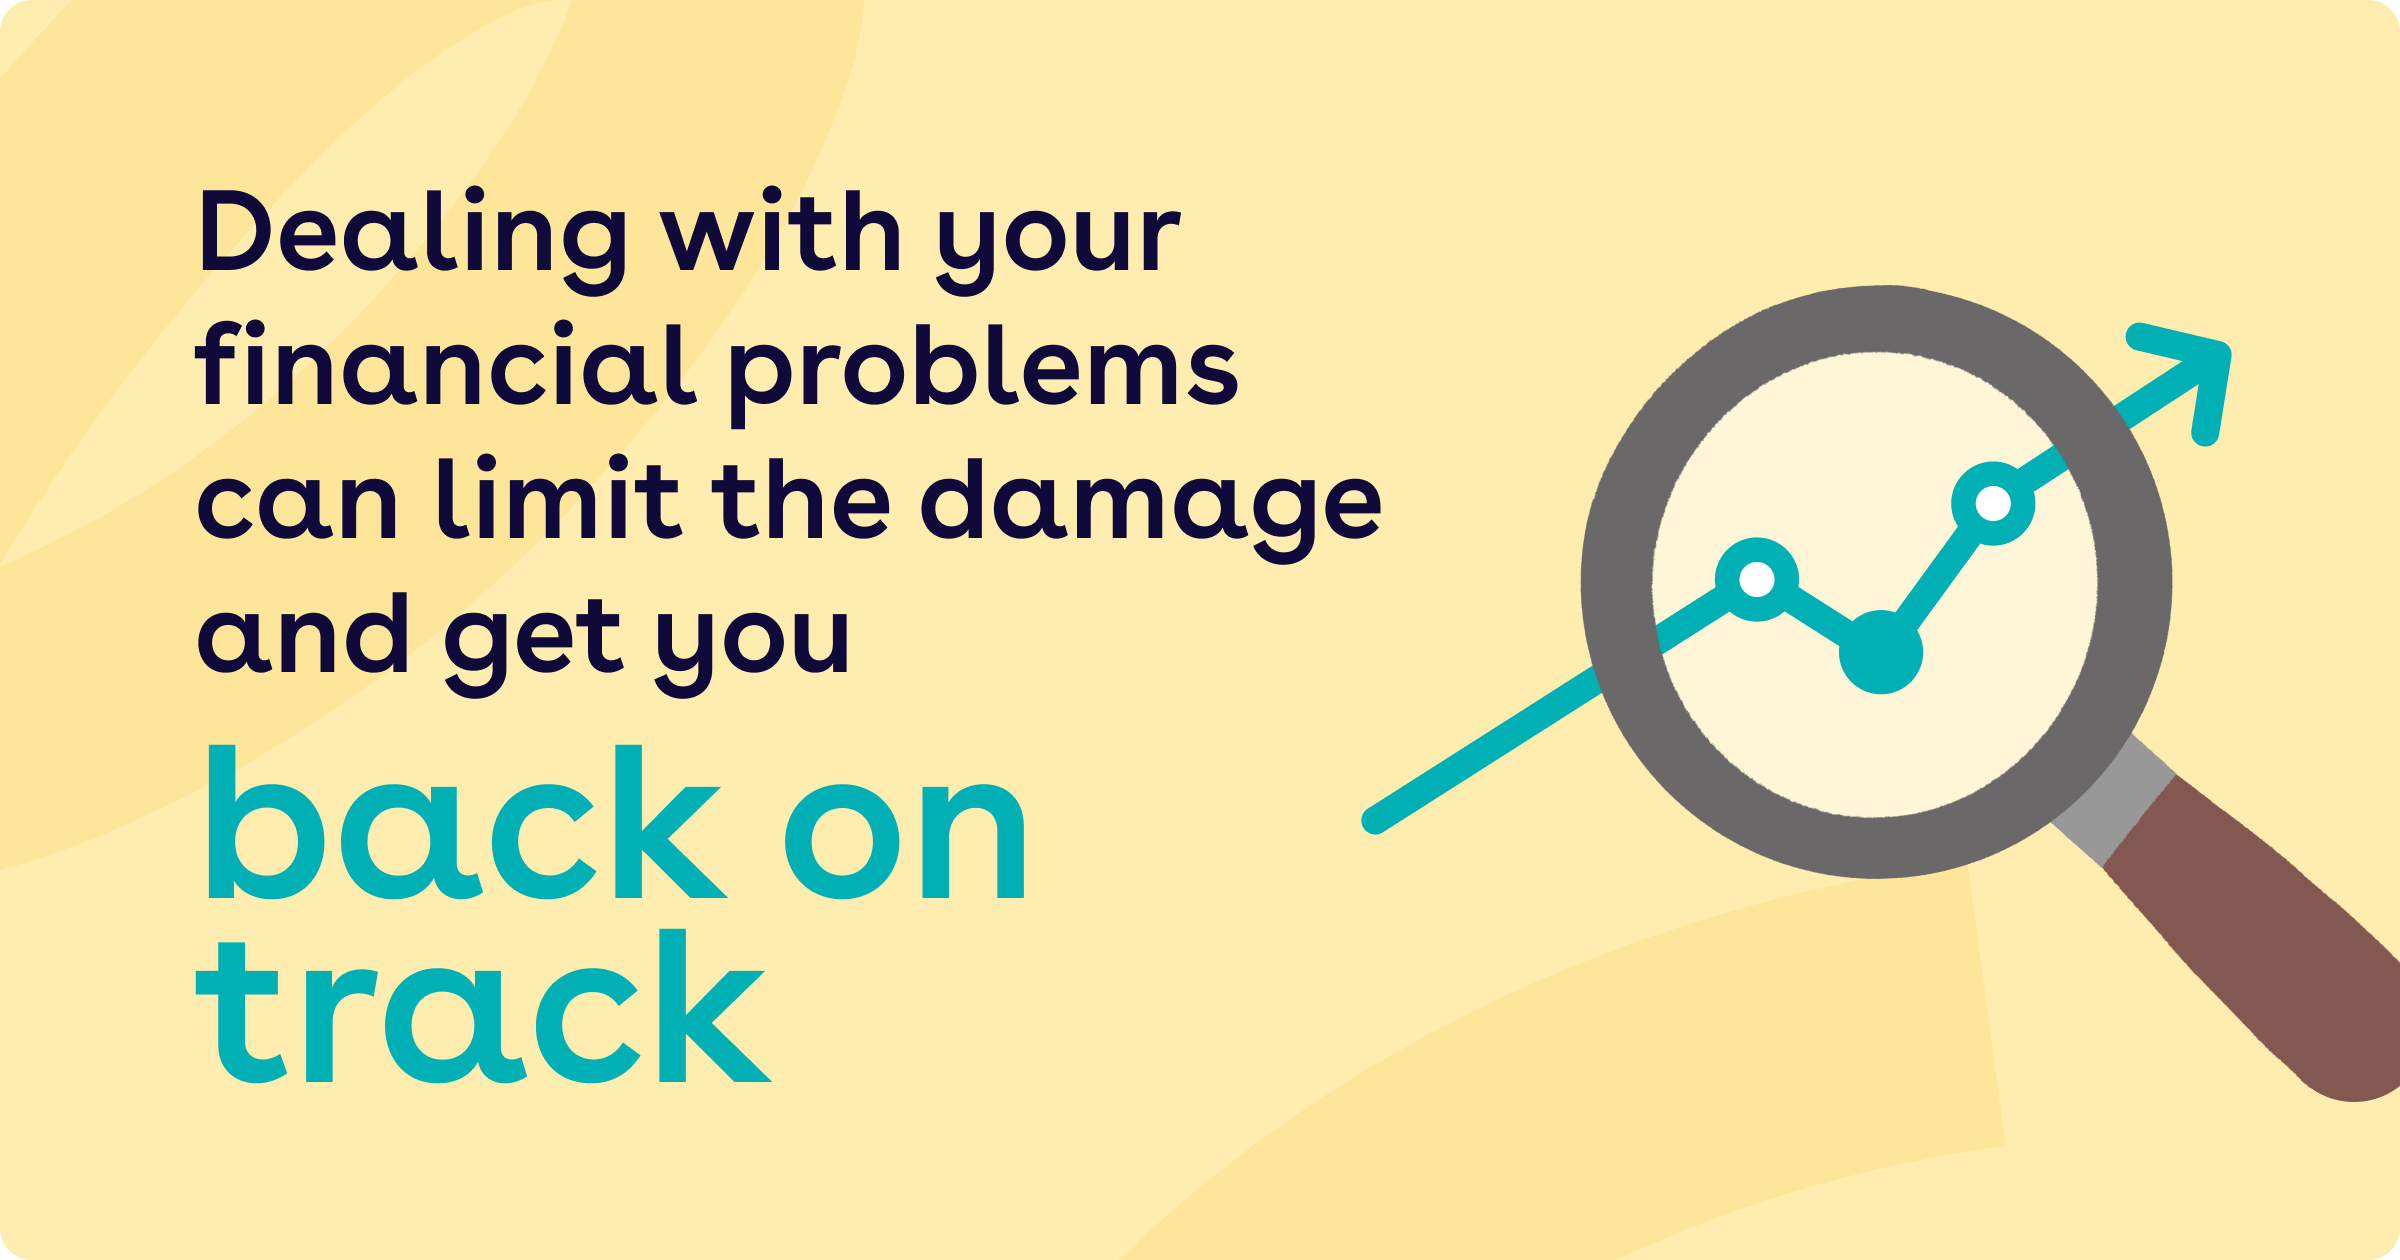 Dealing with your financial problems can limit the damage and get you back on track